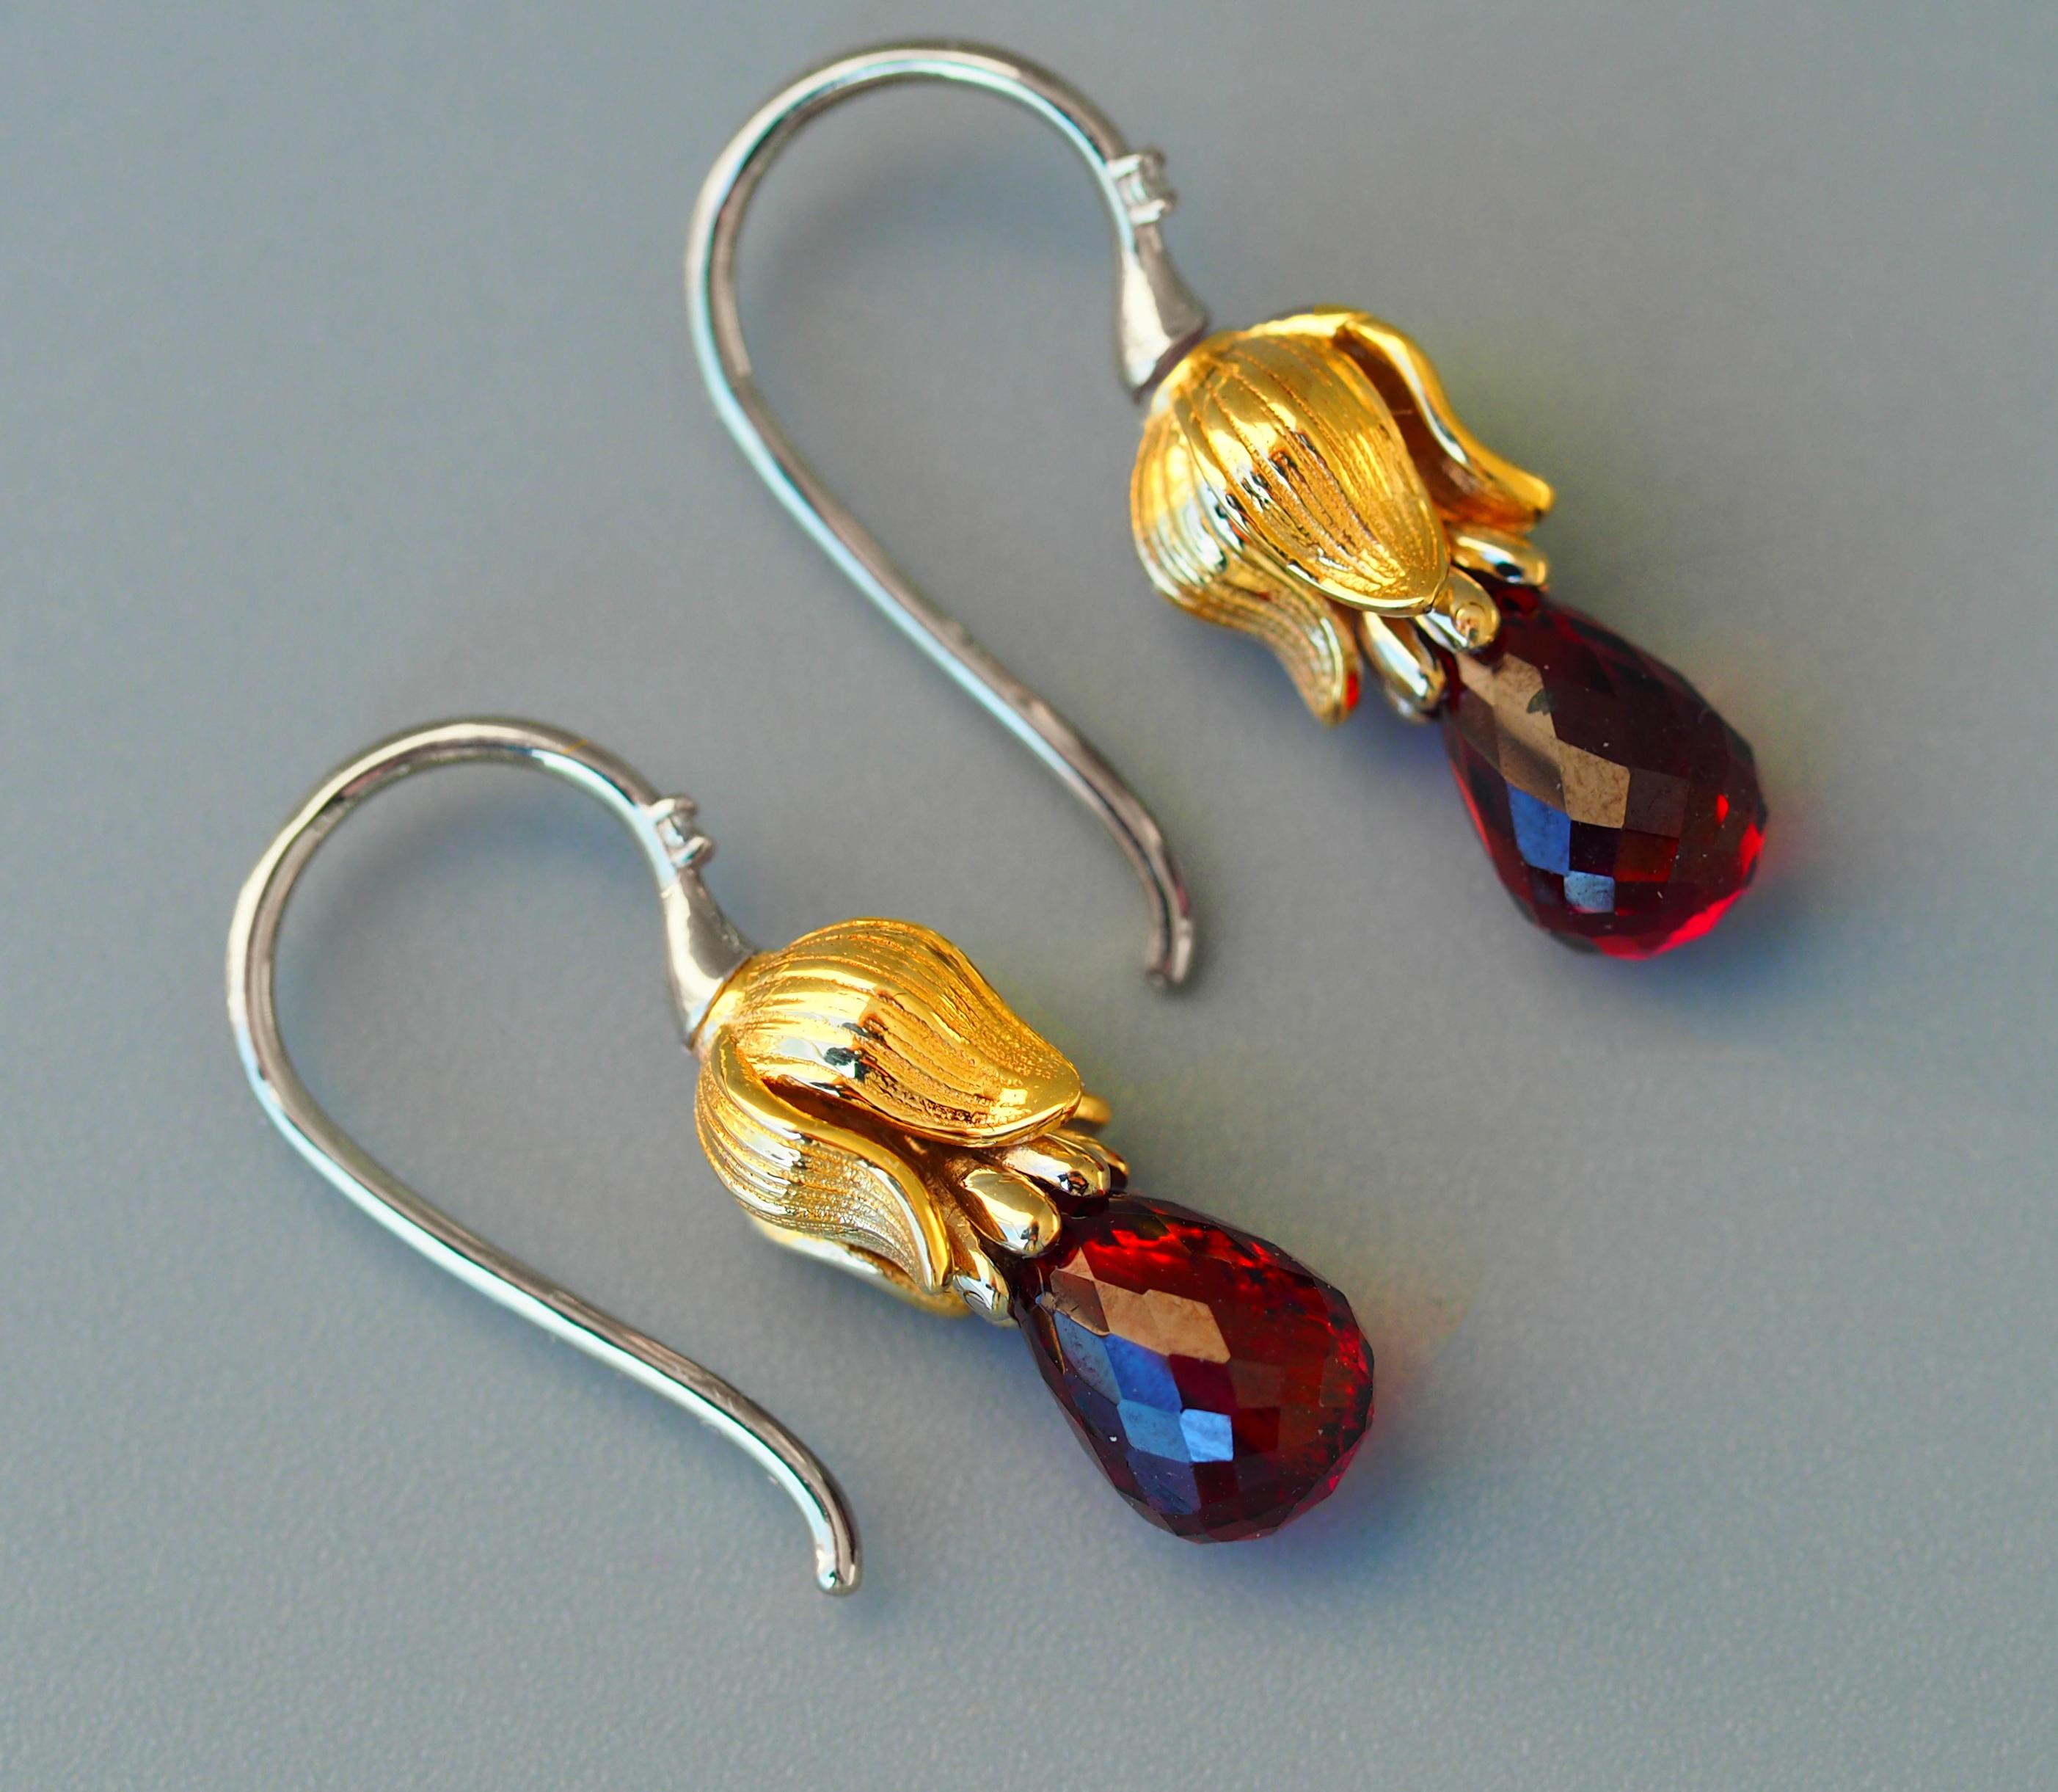 Garnet and diamonds earrings. 
Briolette garnet earrings. Lily flower earrings. Gold drop earrings. Statement earrings. Plant earrings.

Gold color yellow and white - 14k marked
Weight: - 3.25 g.
Size: 21x6mm. 
 
Garnets 2 pieces - red color,